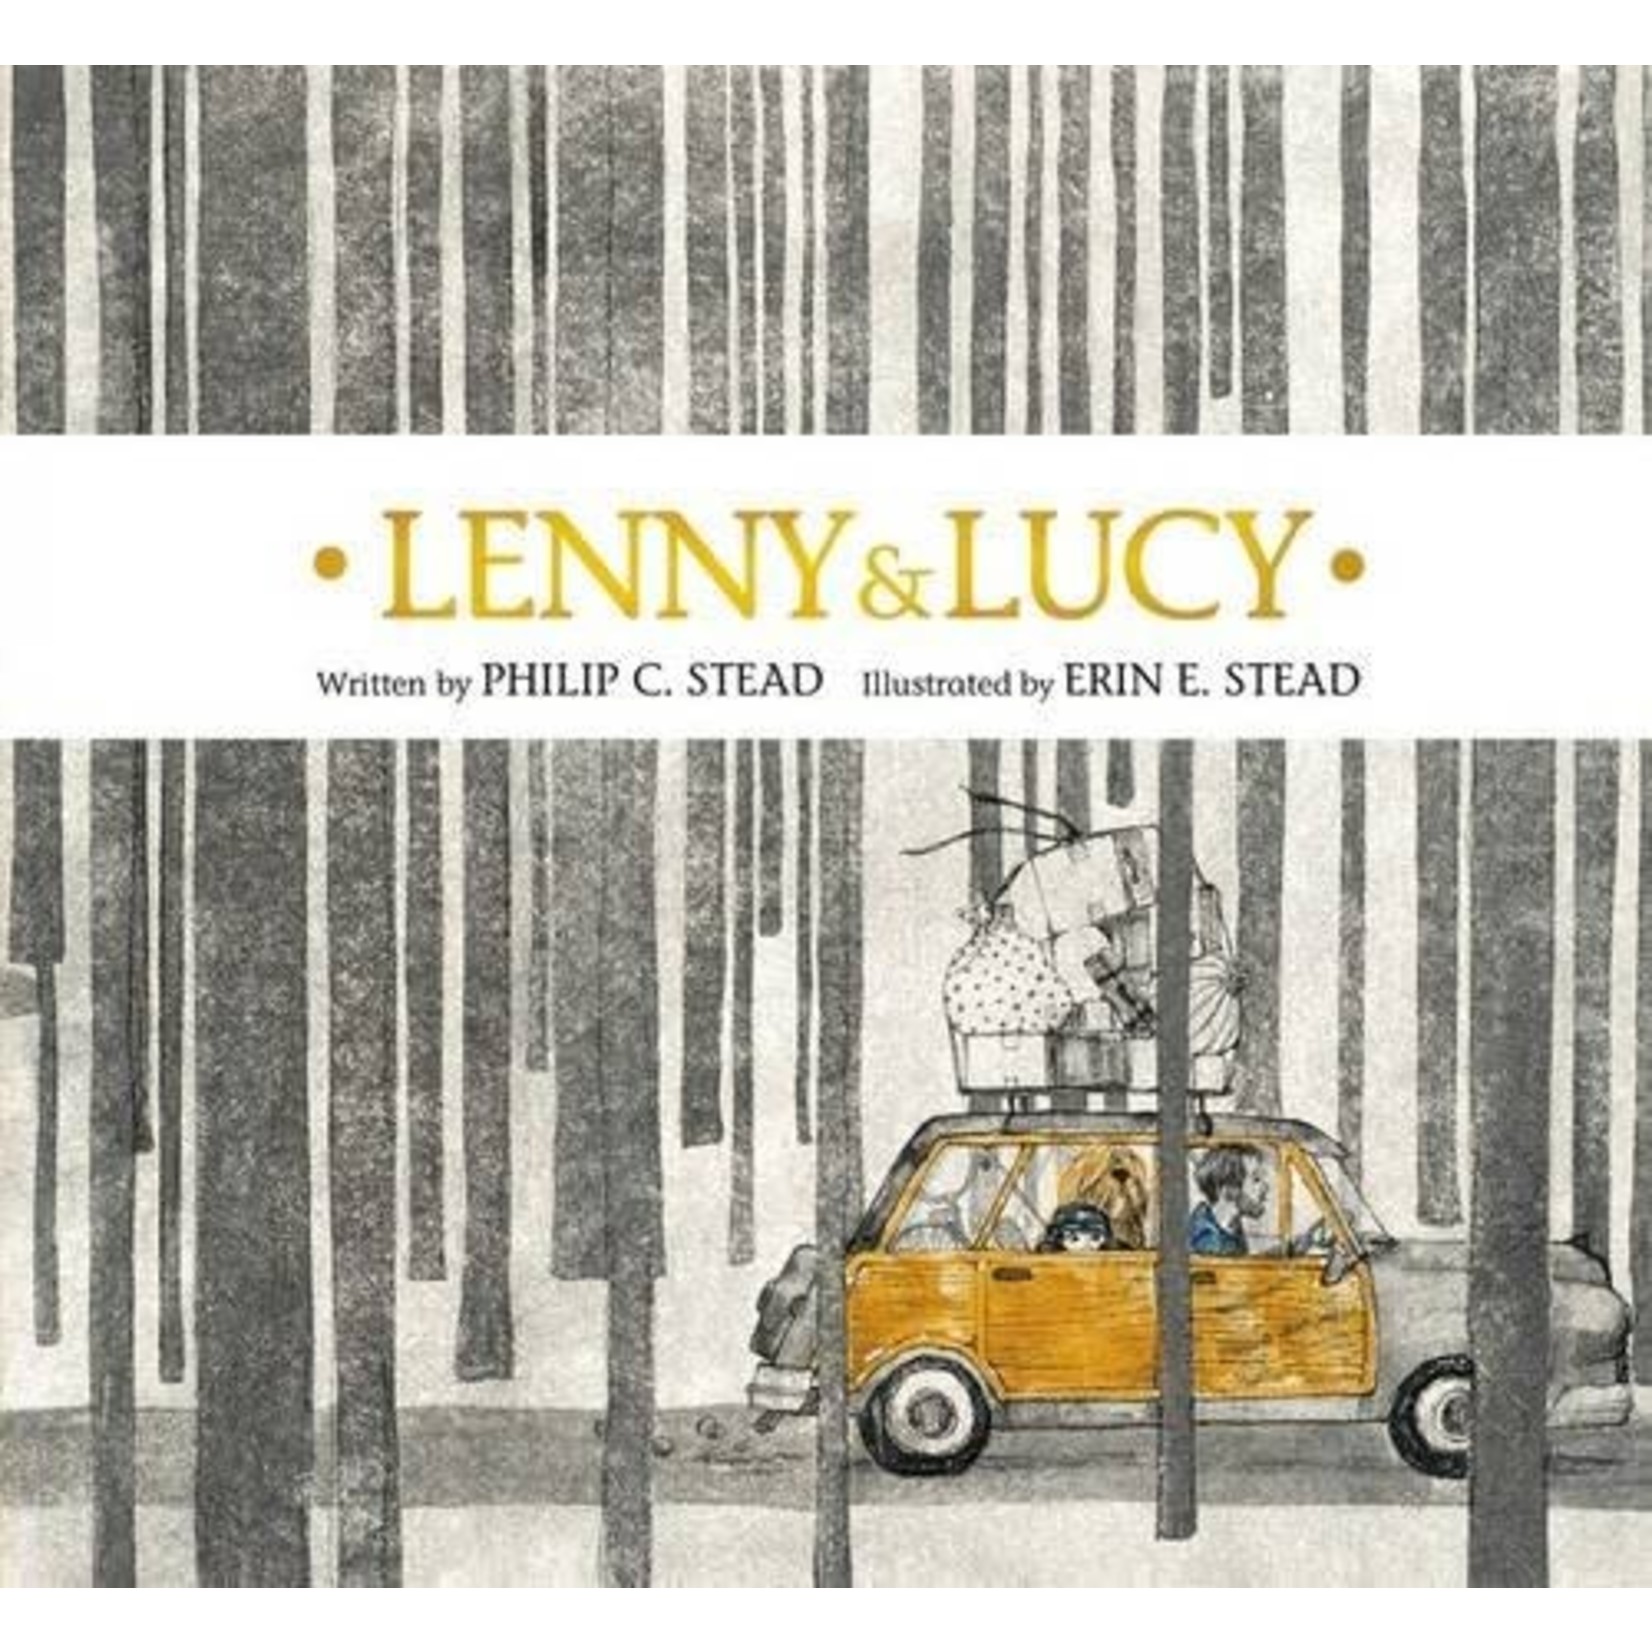 Lenny & Lucy by Philip C. Stead